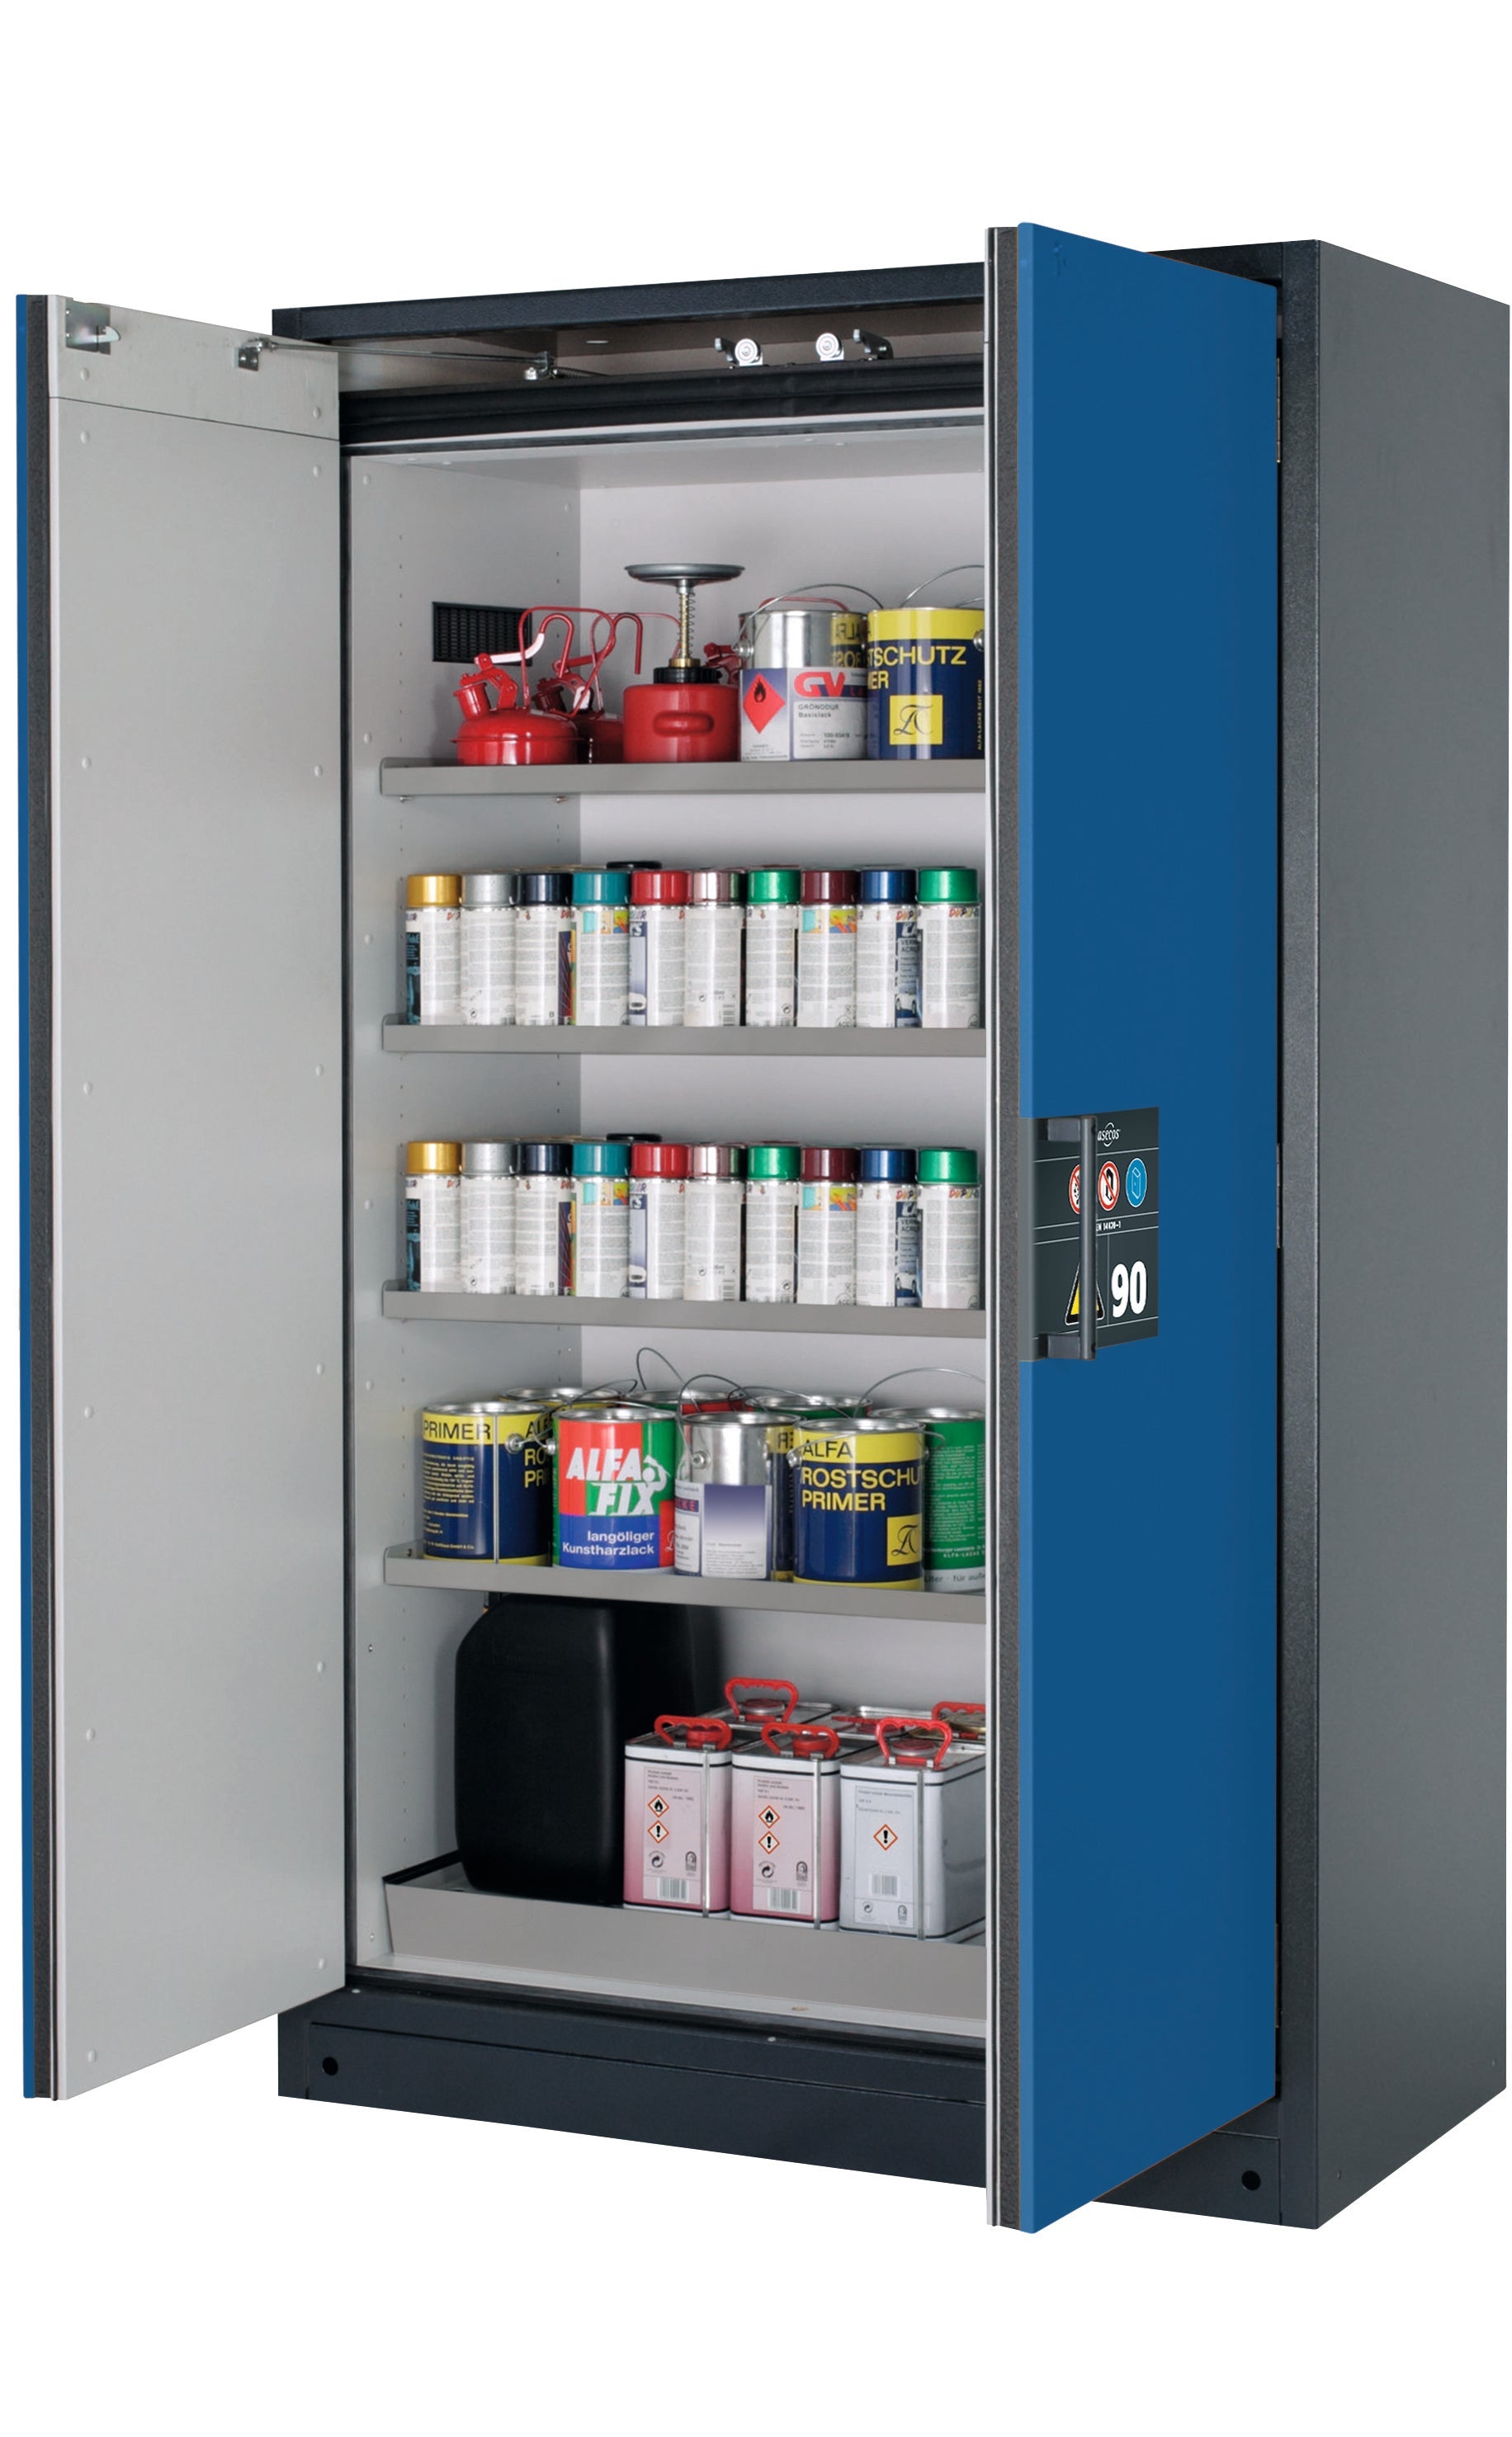 Type 90 safety storage cabinet Q-CLASSIC-90 model Q90.195.120 in gentian blue RAL 5010 with 4x shelf standard (stainless steel 1.4301),